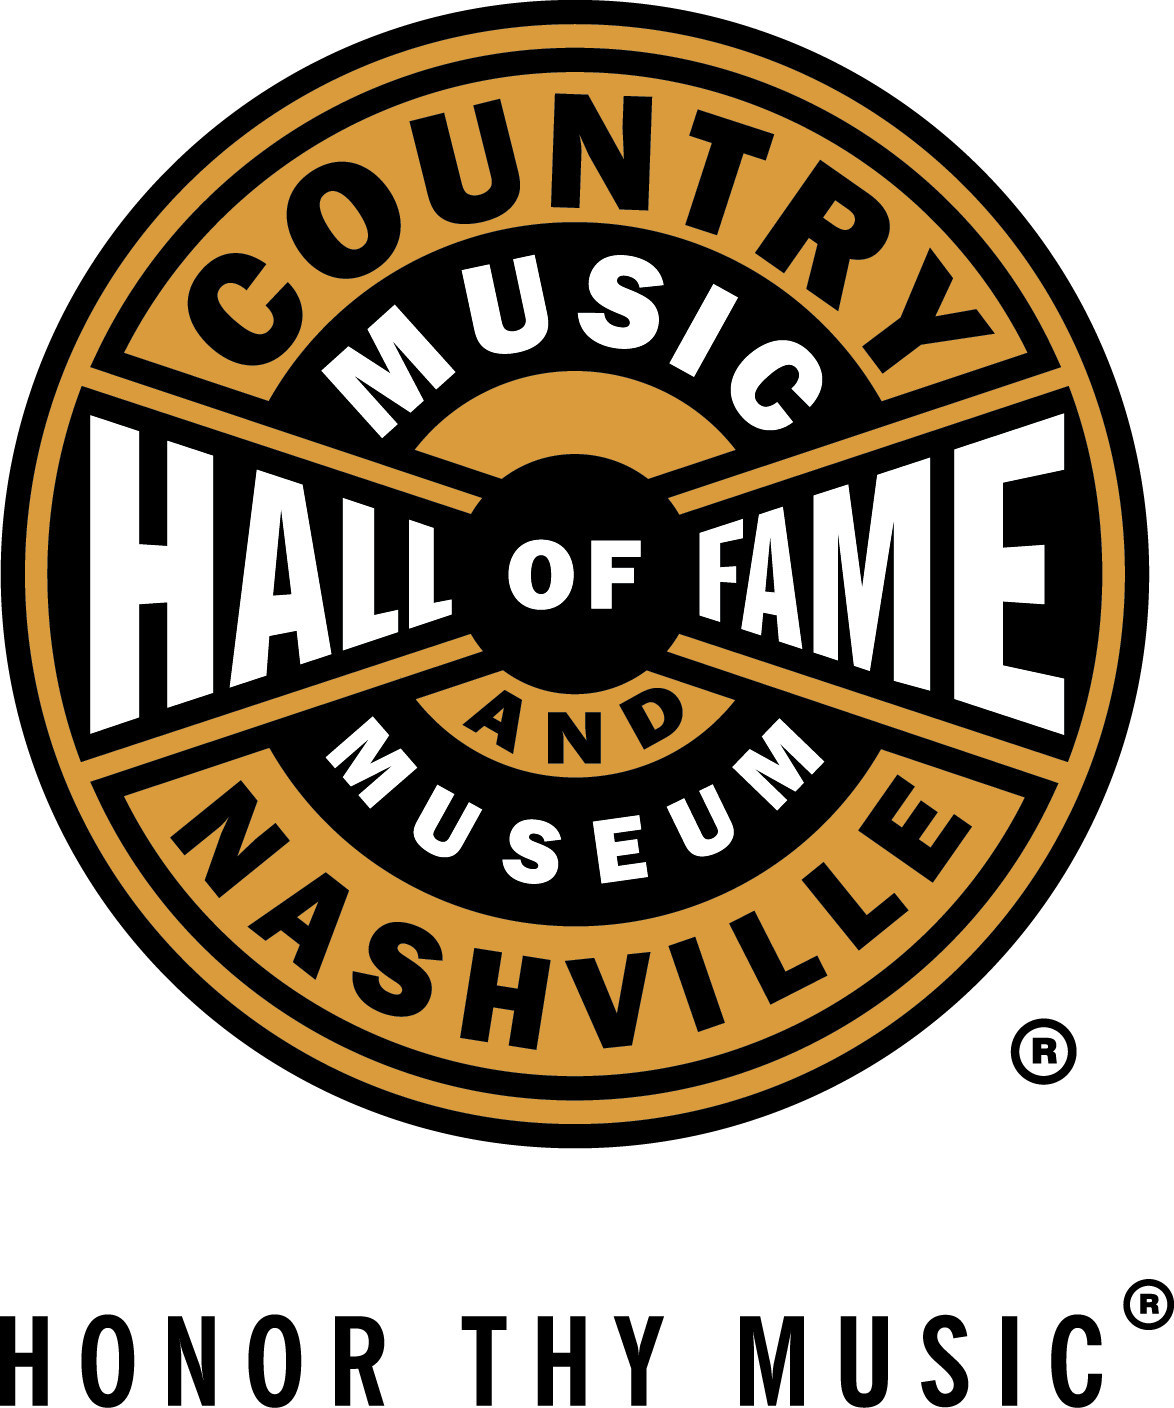 Through Taylor Swifts Eras - Country Music Hall of Fame and Museum